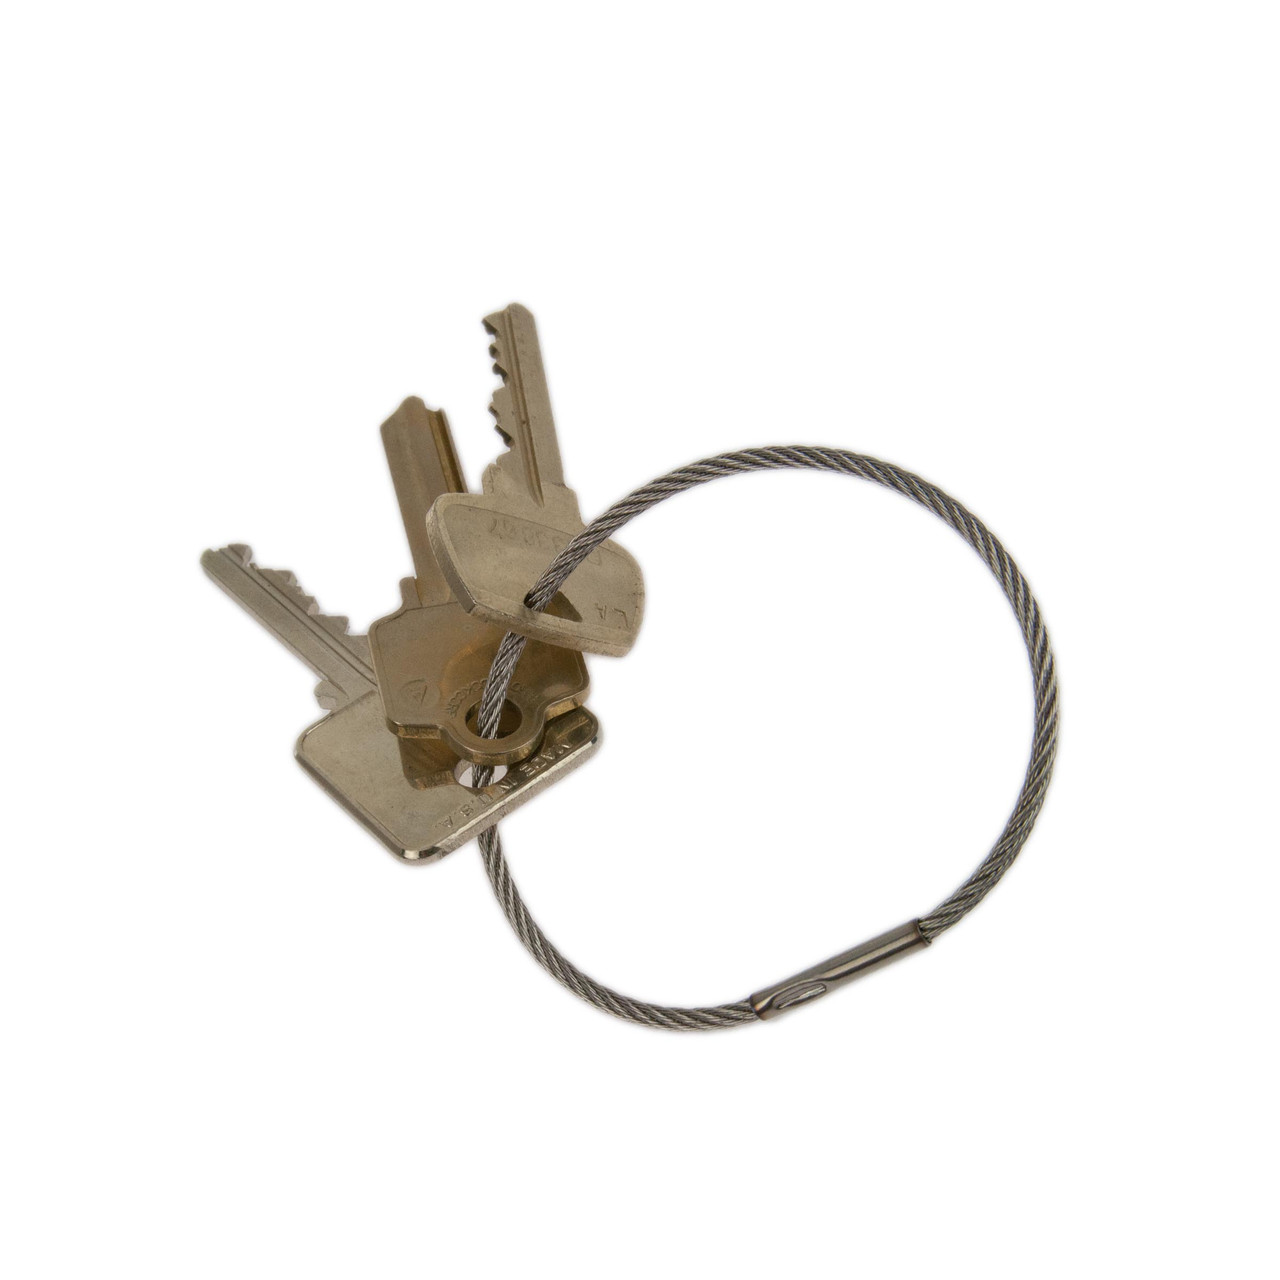 6 Cable Key Rings: Stainless Steel Wire Keyrings, Metal Ring Security  Lanyards. 